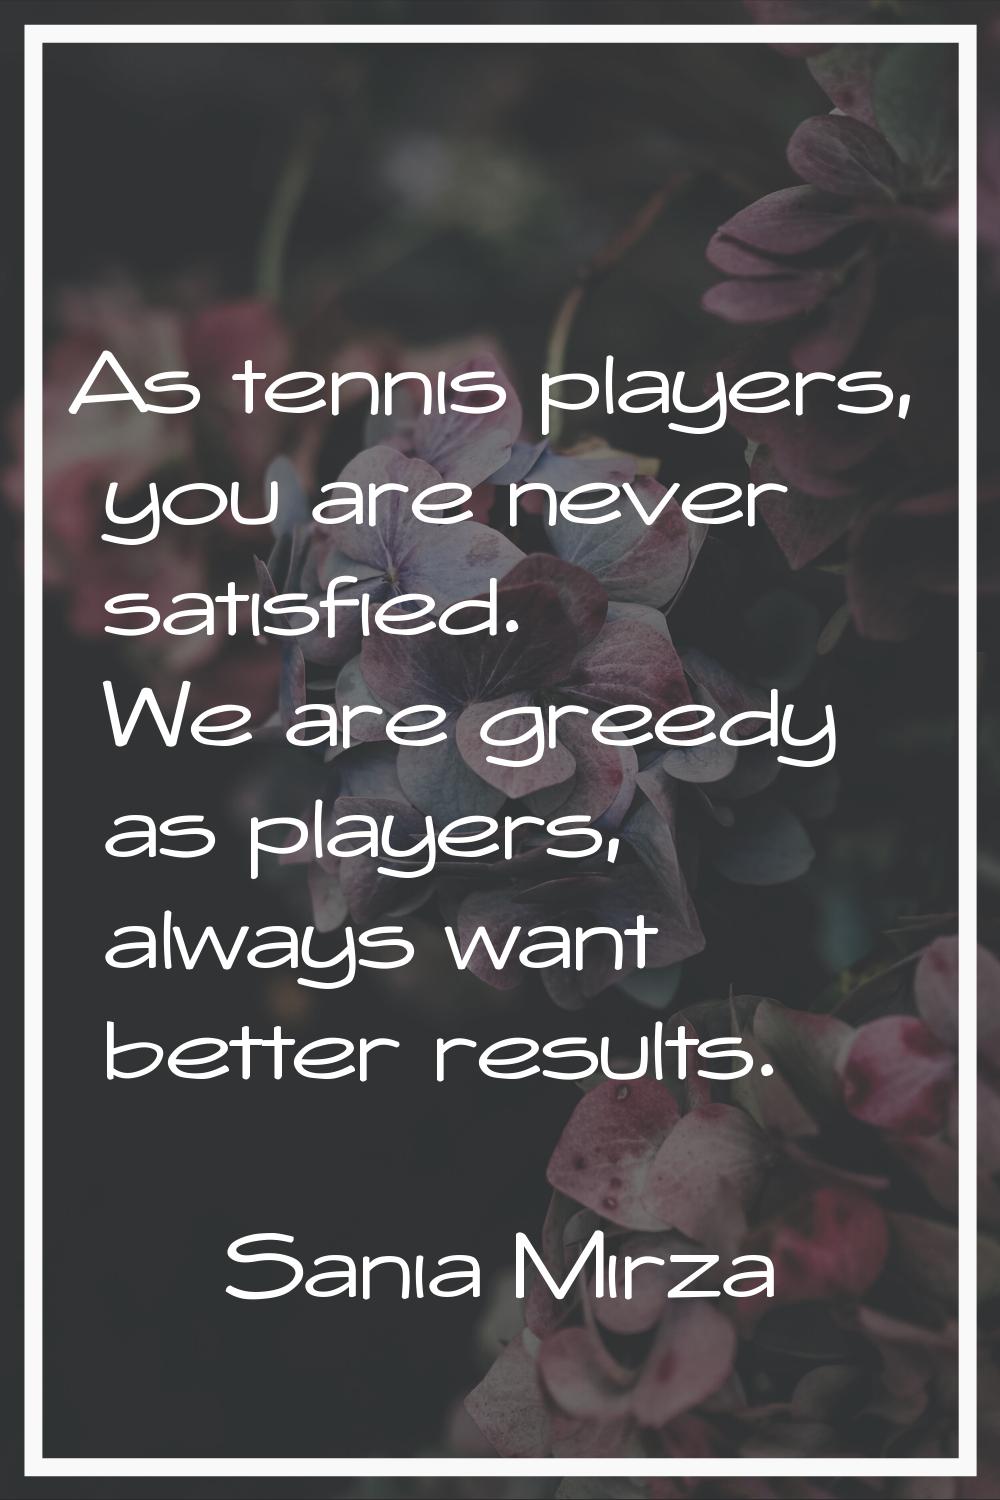 As tennis players, you are never satisfied. We are greedy as players, always want better results.